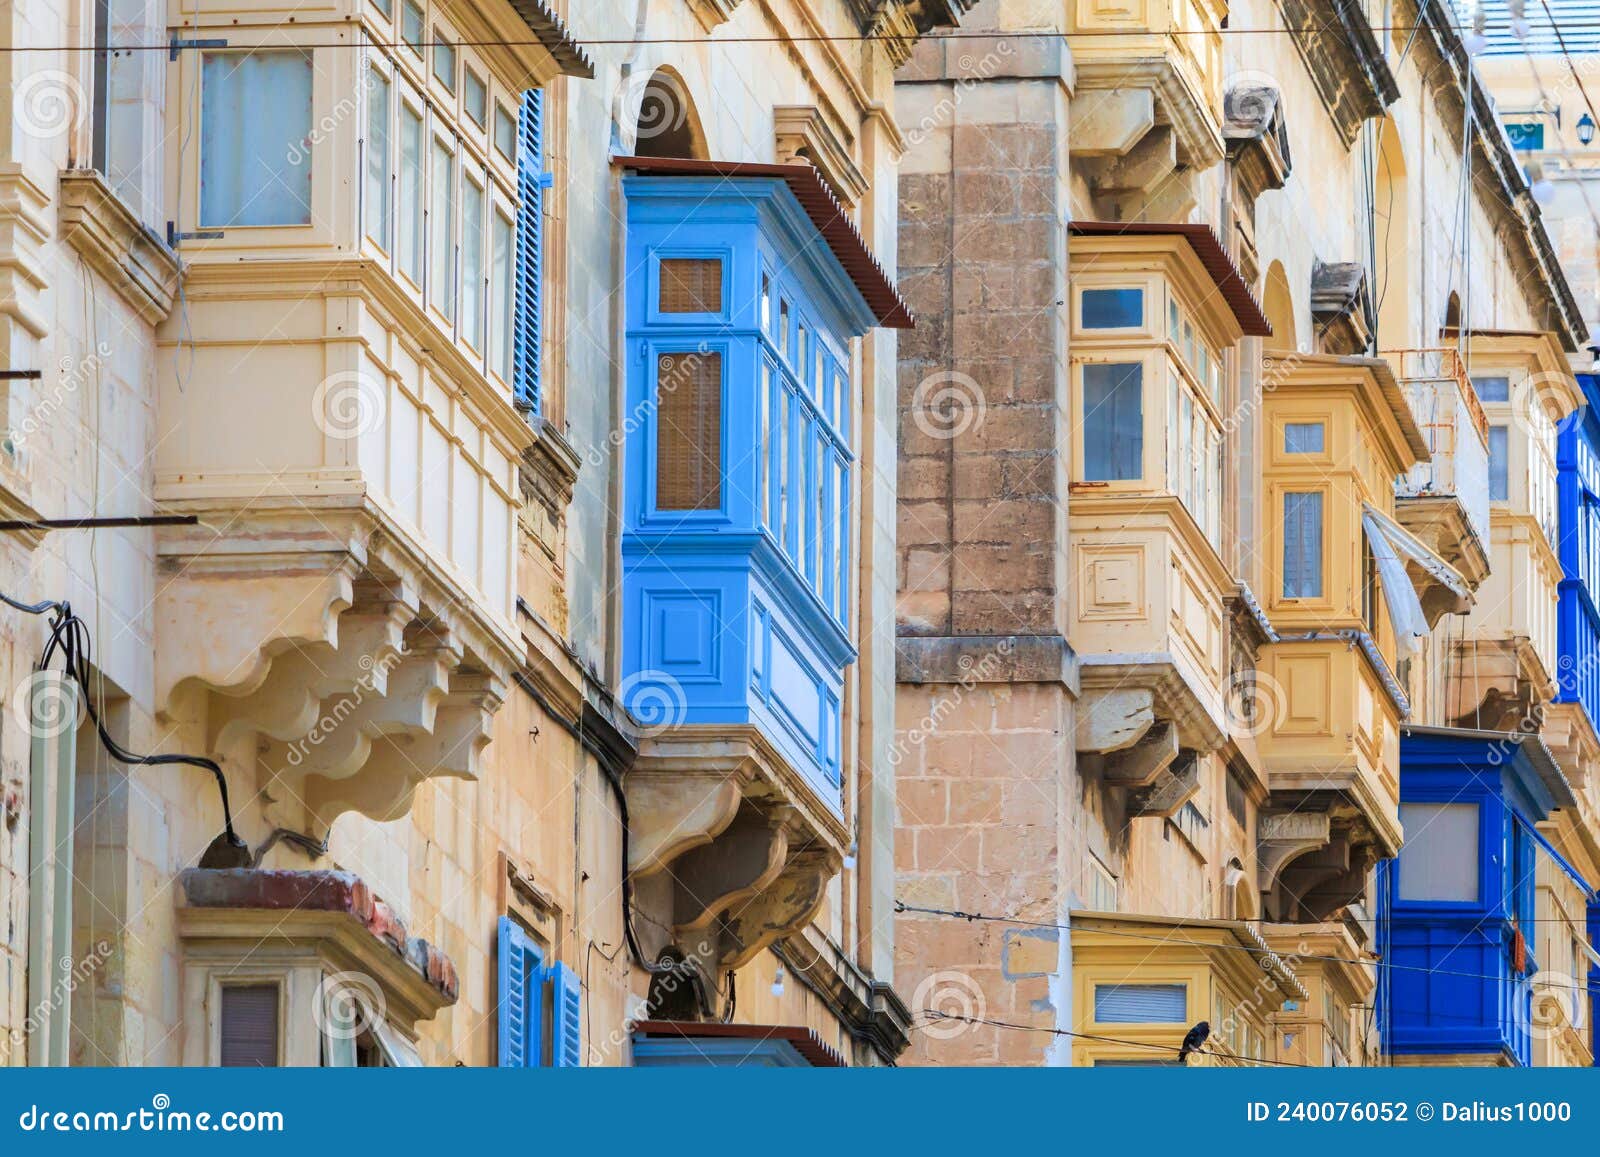 historical old colorful balconies in valletta, malta